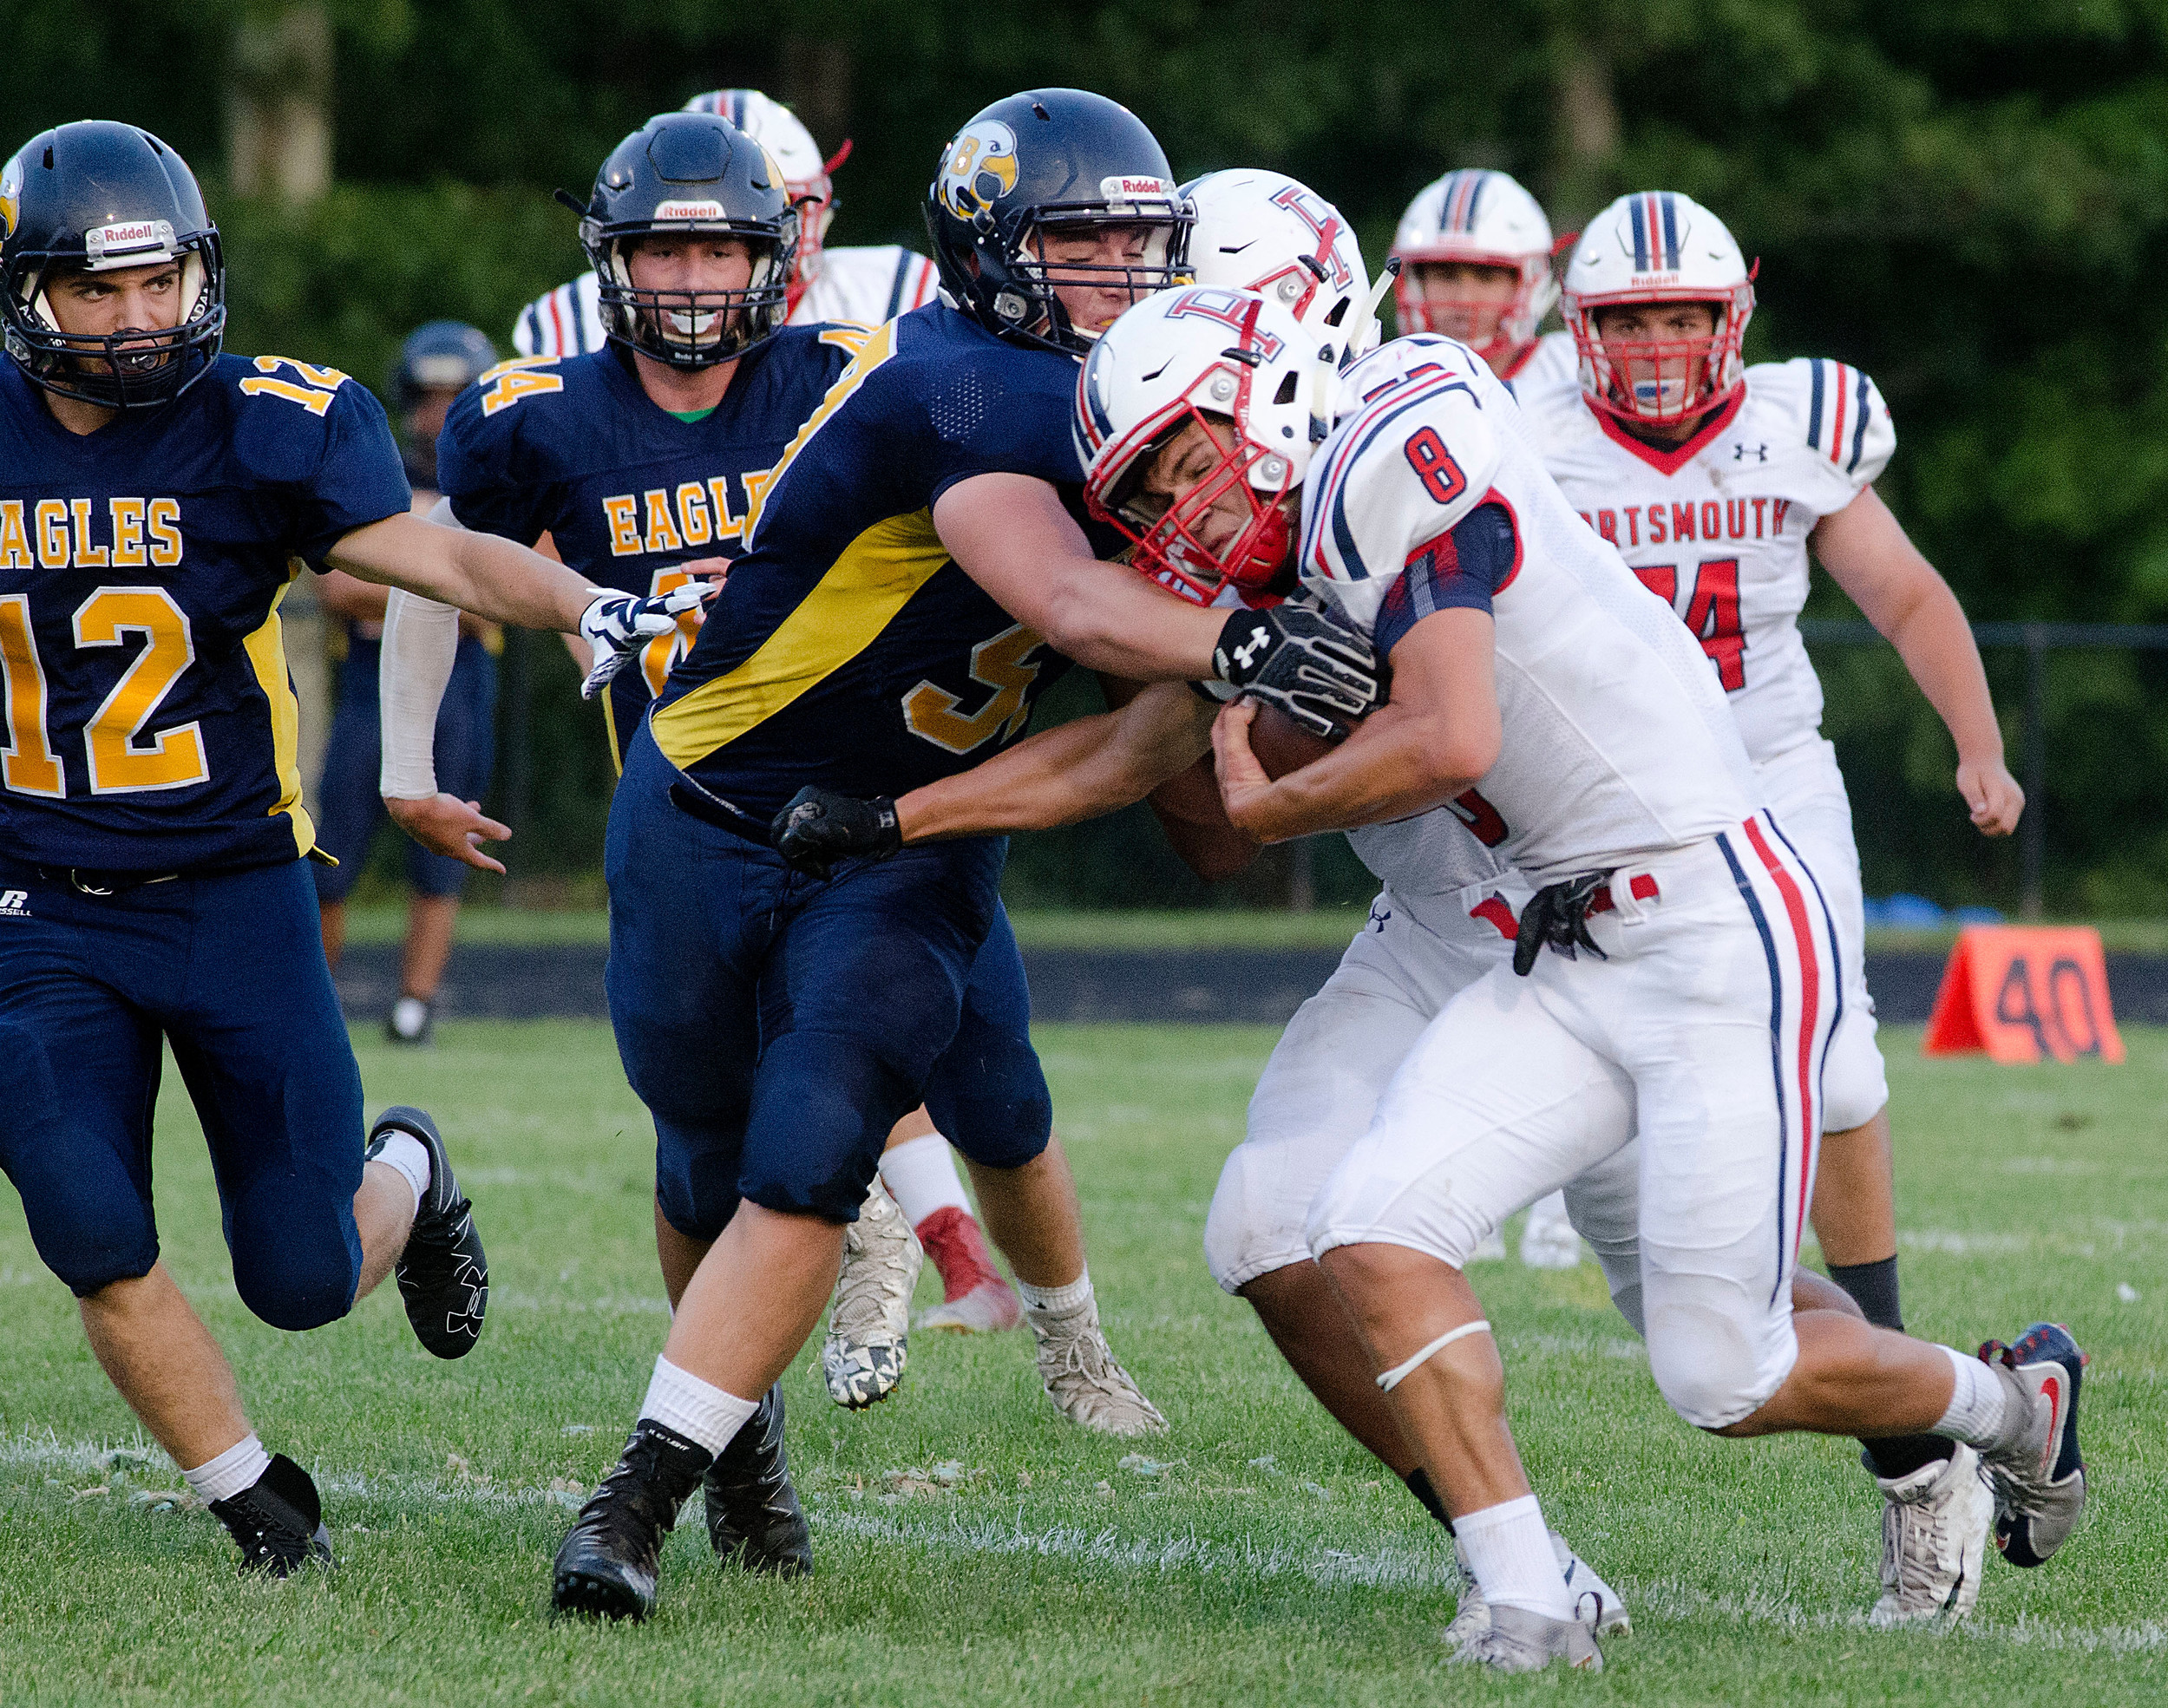 Portsmouth running back powers past a Barrington defender during an Injury Fund game game on Thursday night at Tiverton High School.